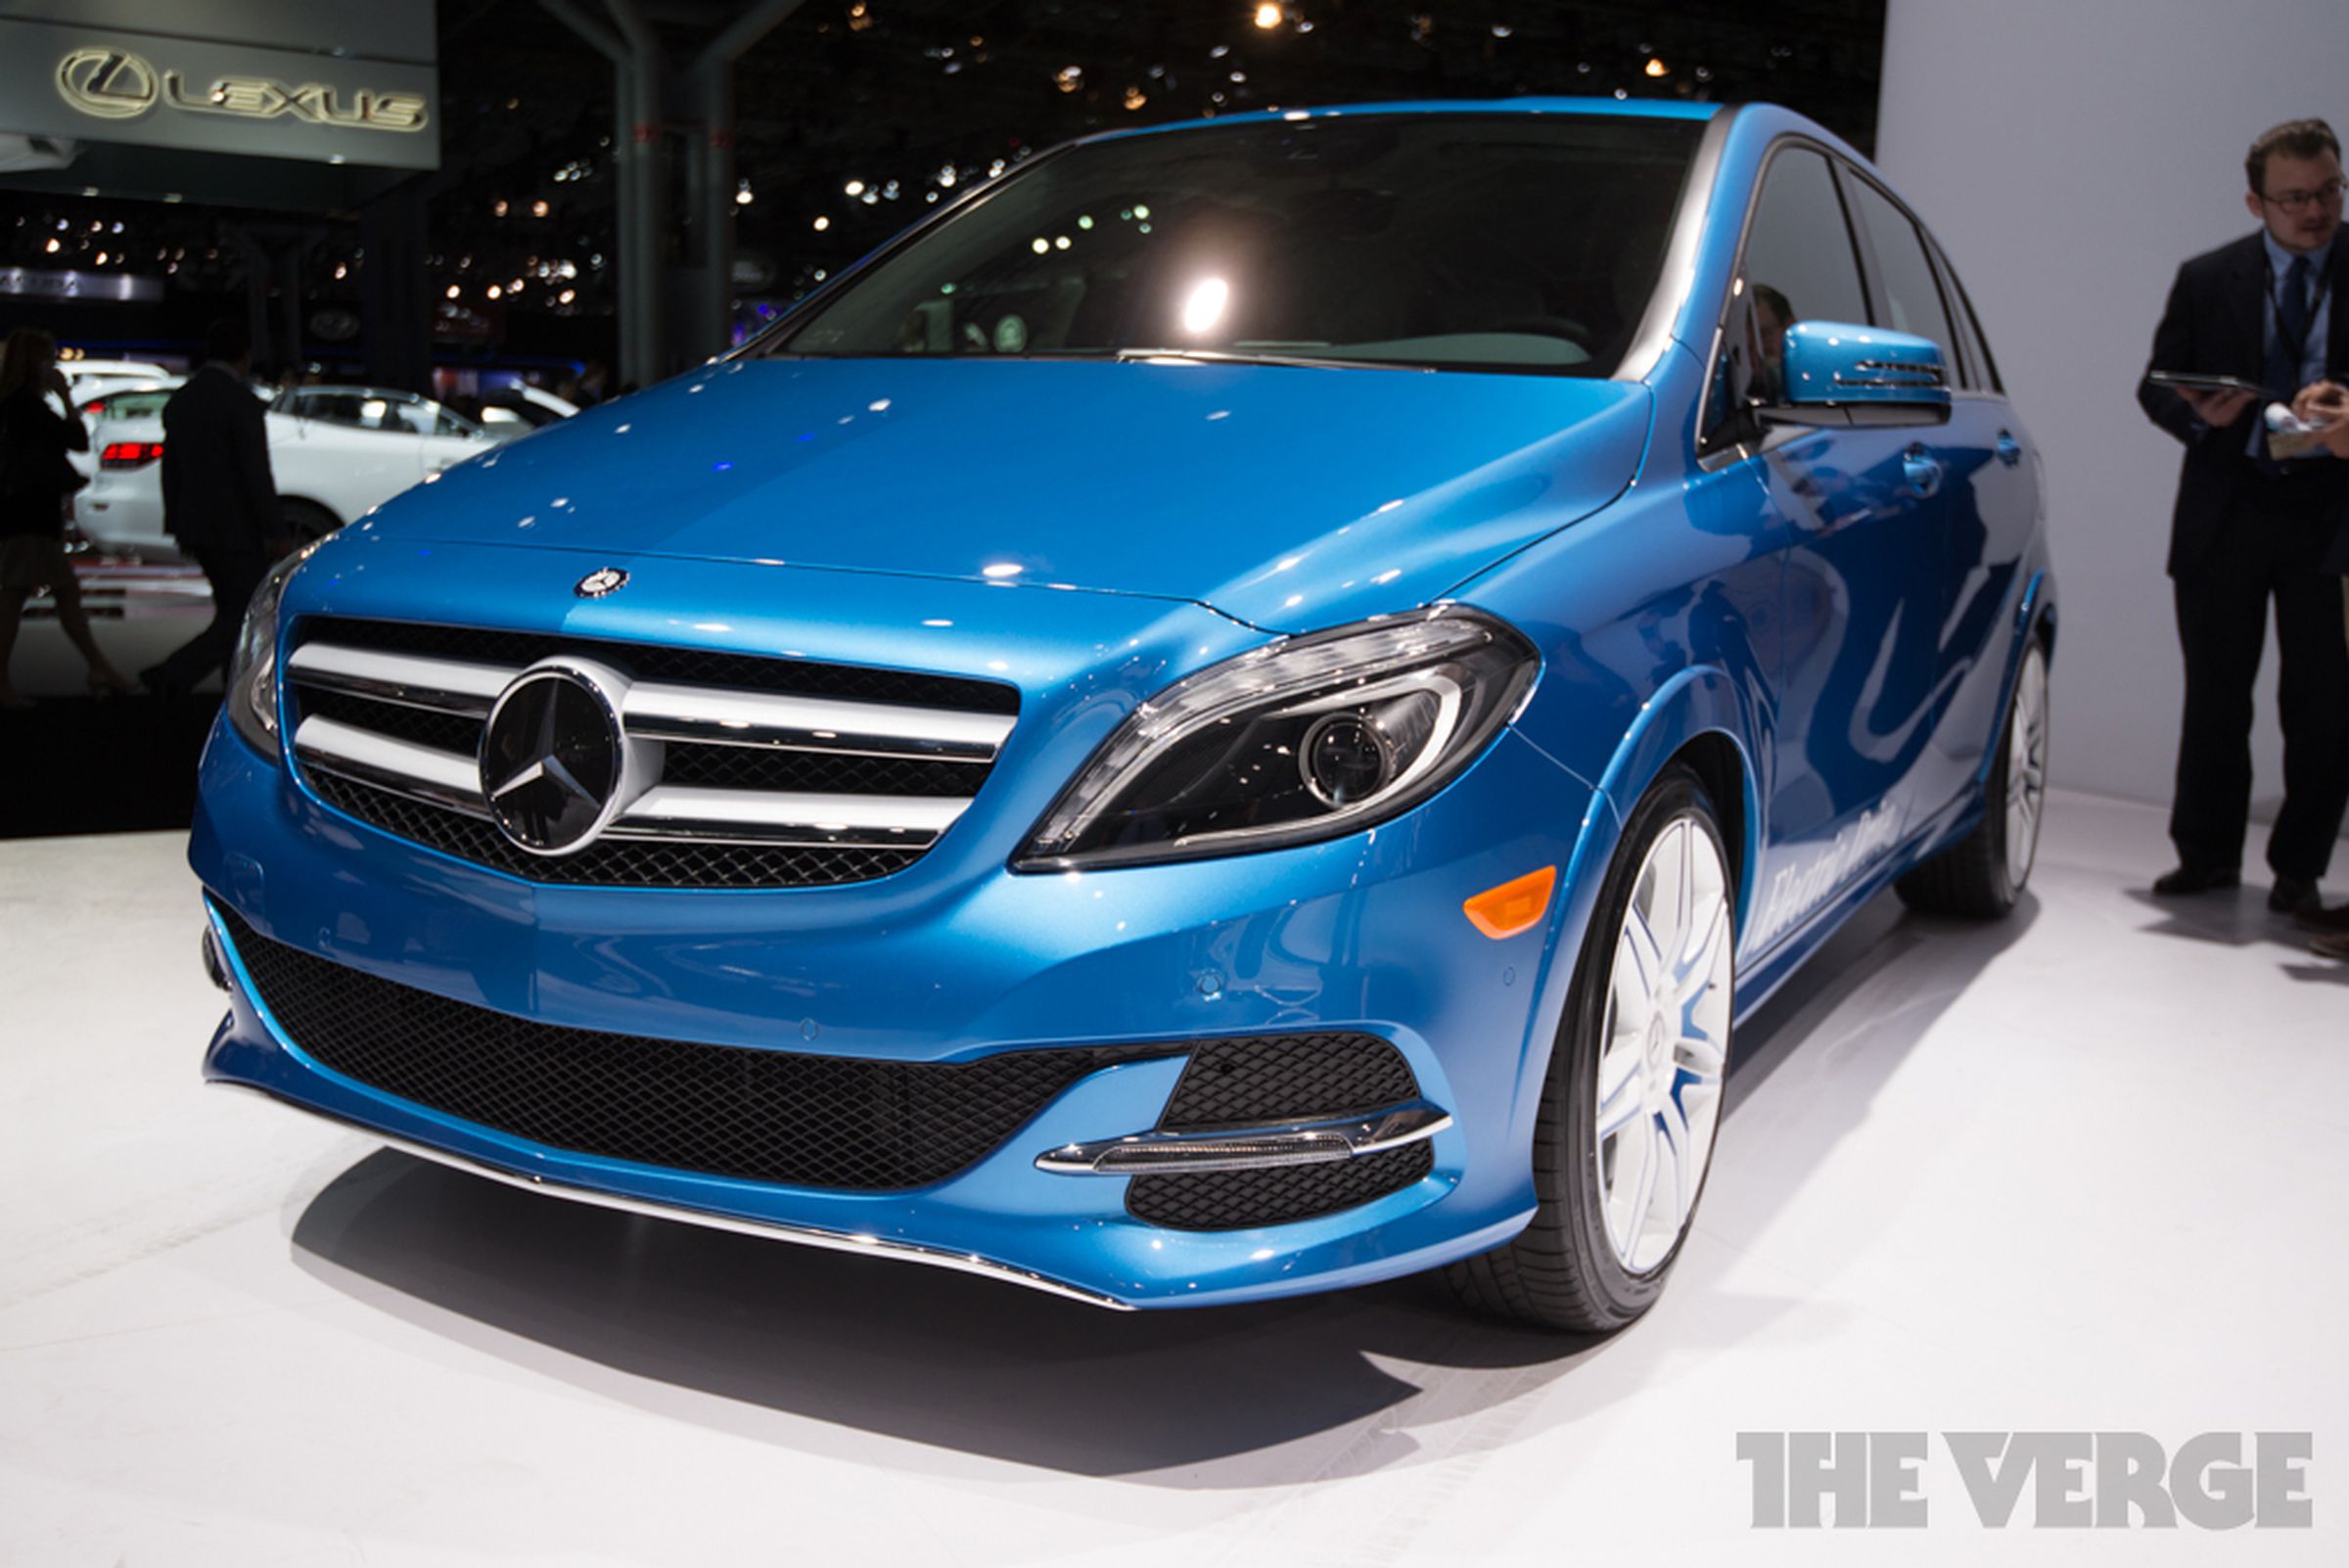 Mercedes B-Class Electric Drive hands-on pictures